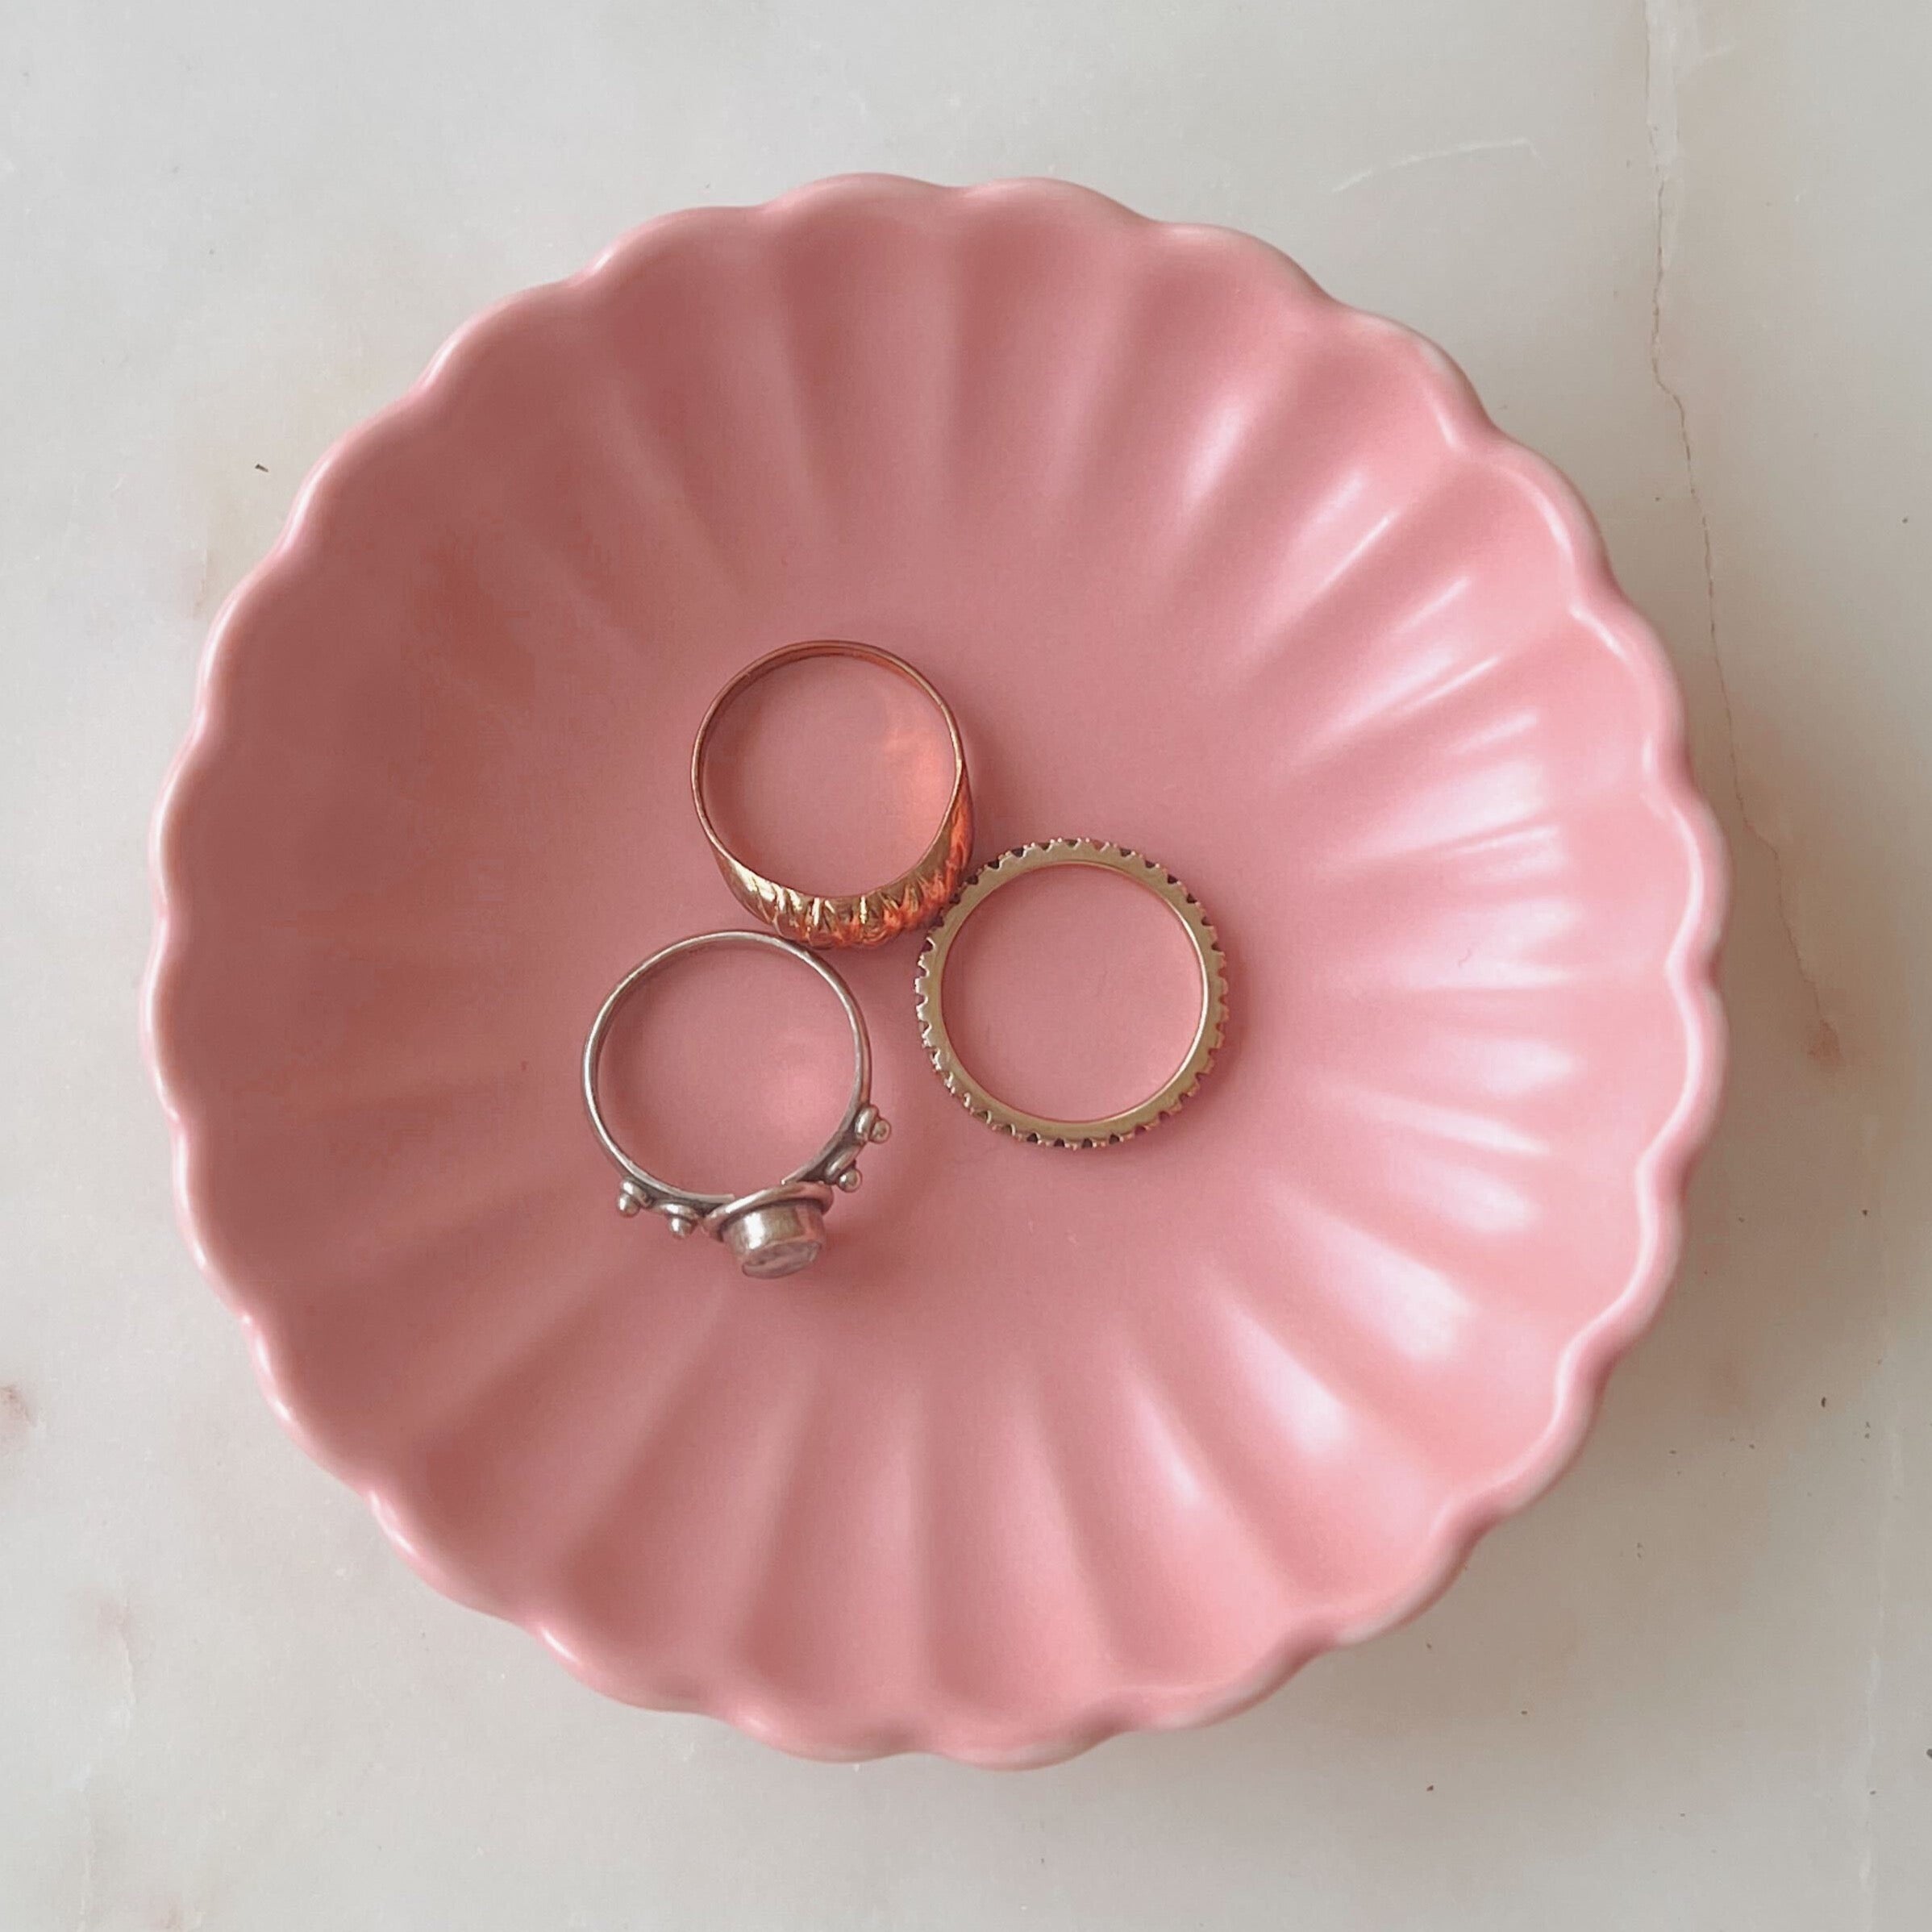 Blush Scalloped Dish with rings